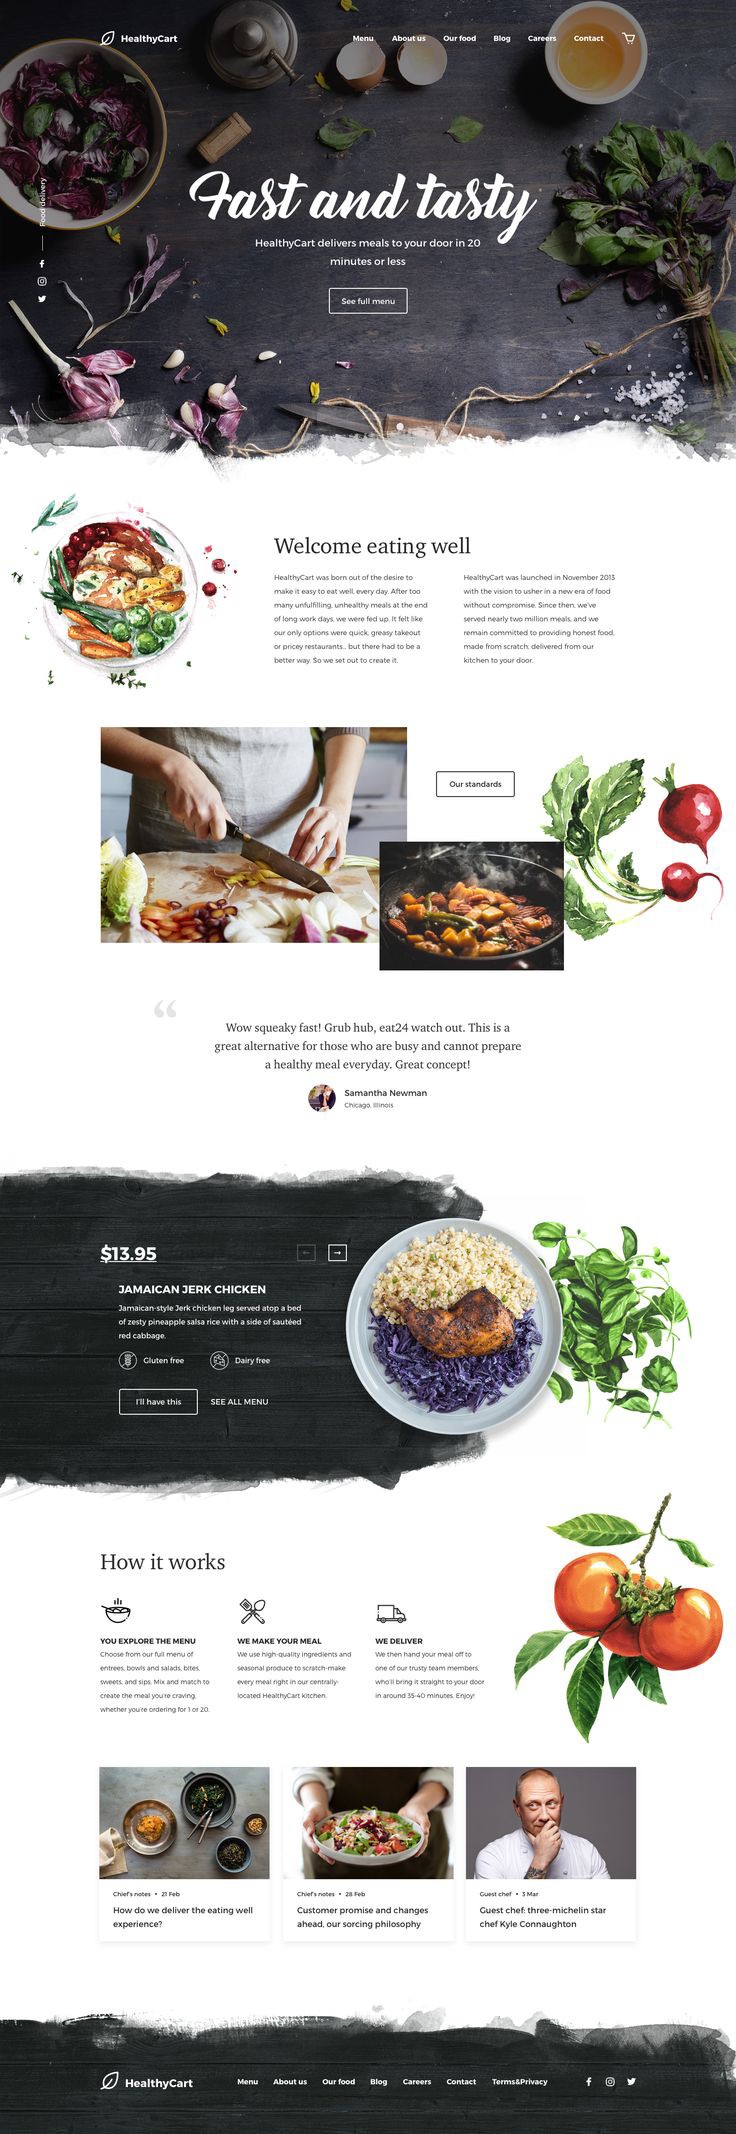 Weebly Landing Web pages templates 